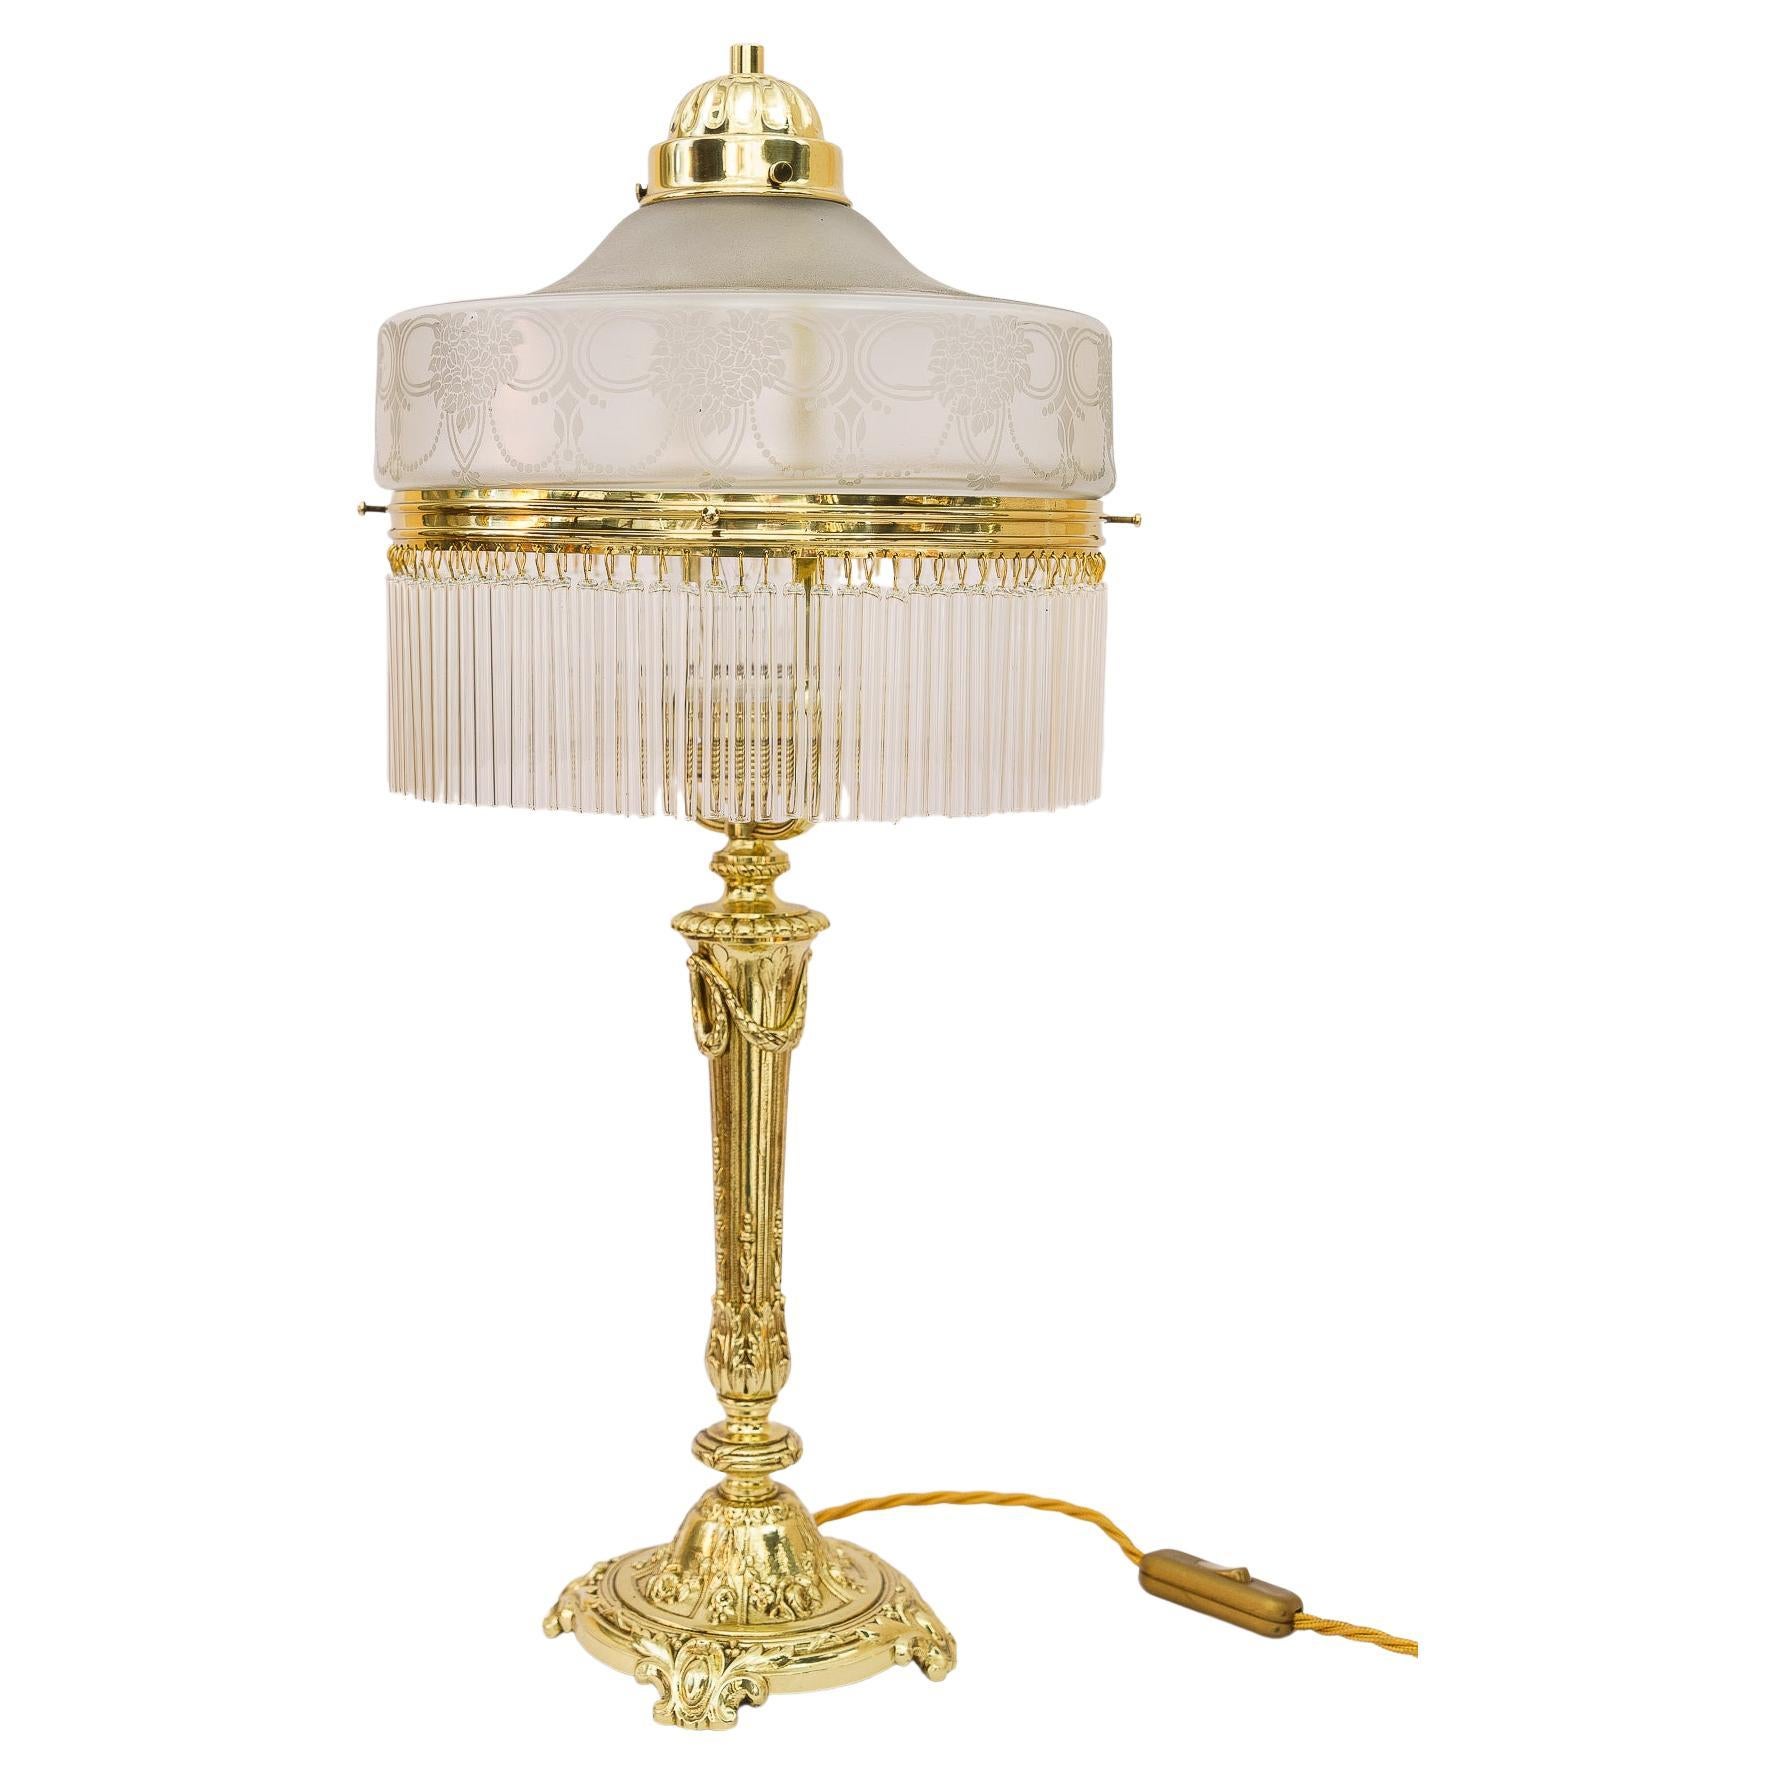 Floral Jugendstil Table Lamp with Glass Shade Vienna Around 1908